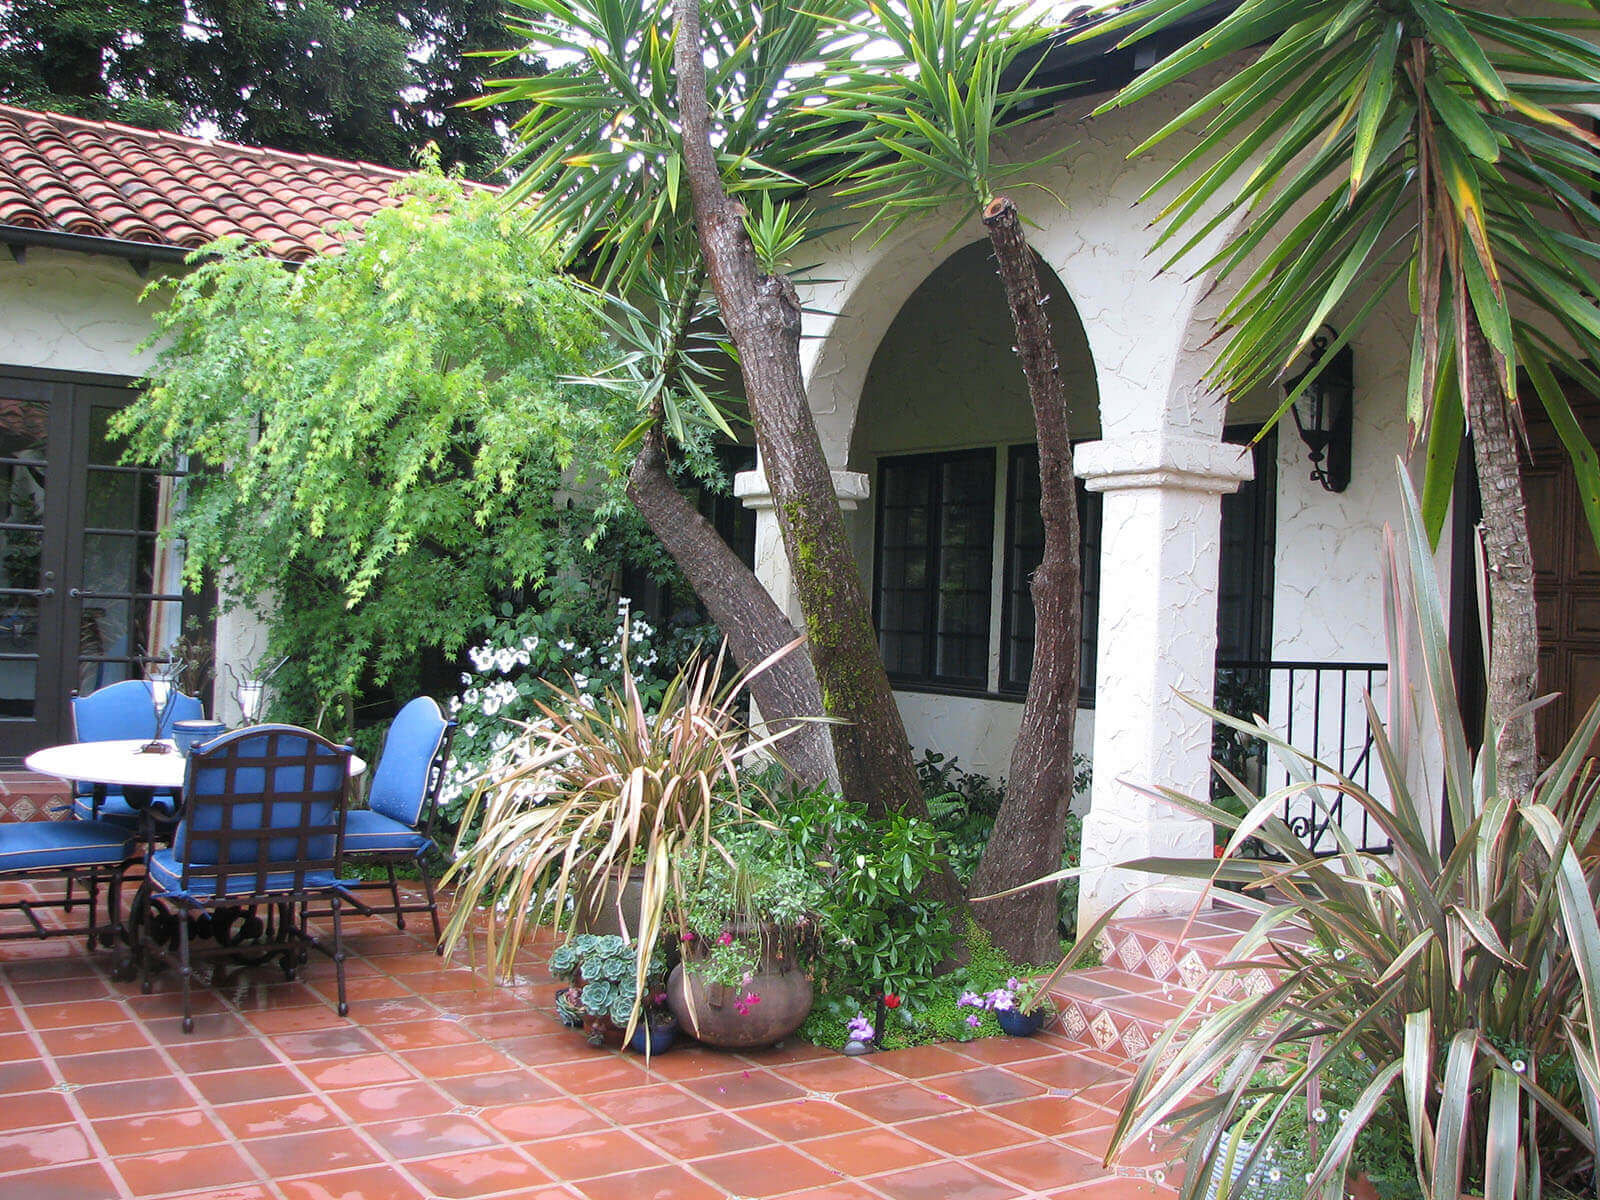 Saltillo-tiled courtyard with Mission-style arches and tropical planting